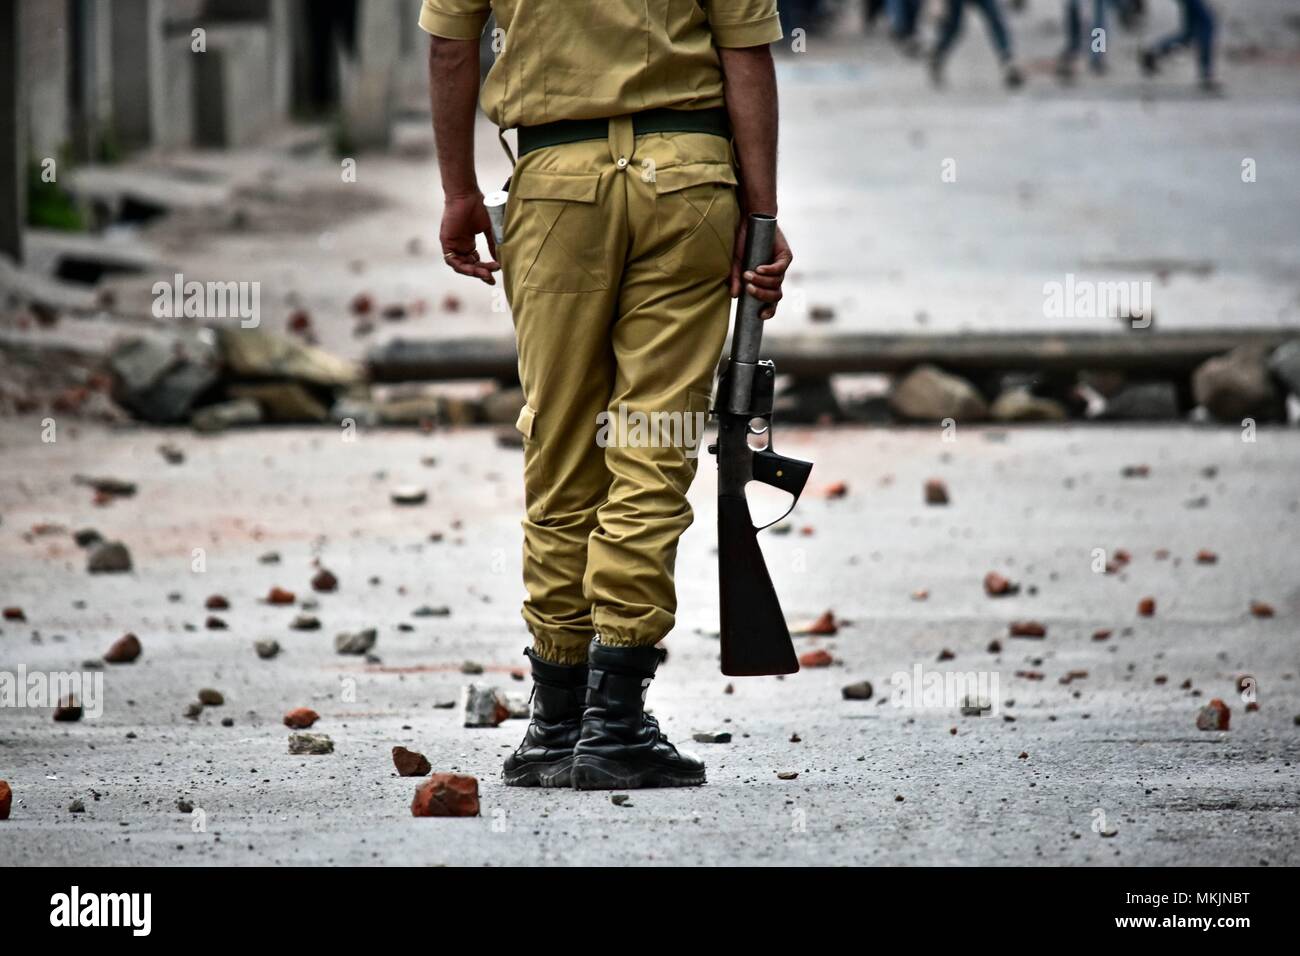 May 8, 2018 - Srinagar, J&K, India - An Indian policeman stands still during clashes in Srinagar, Indian administered Kashmir. Fierce clashes broke out between government forces and Kashmiri protesters in Srinagar on Tuesday as the valley continued to remain tense over the killing of 11 people including 5 militants and 6 civilians in Indian administered Kashmir. Police used tear smoke shells and shot gun pellets to disperse hundreds of demonstrators who hurled rocks and chanted anti-Indian and pro-freedom slogans. Credit: Saqib Majeed/SOPA Images/ZUMA Wire/Alamy Live News Stock Photo